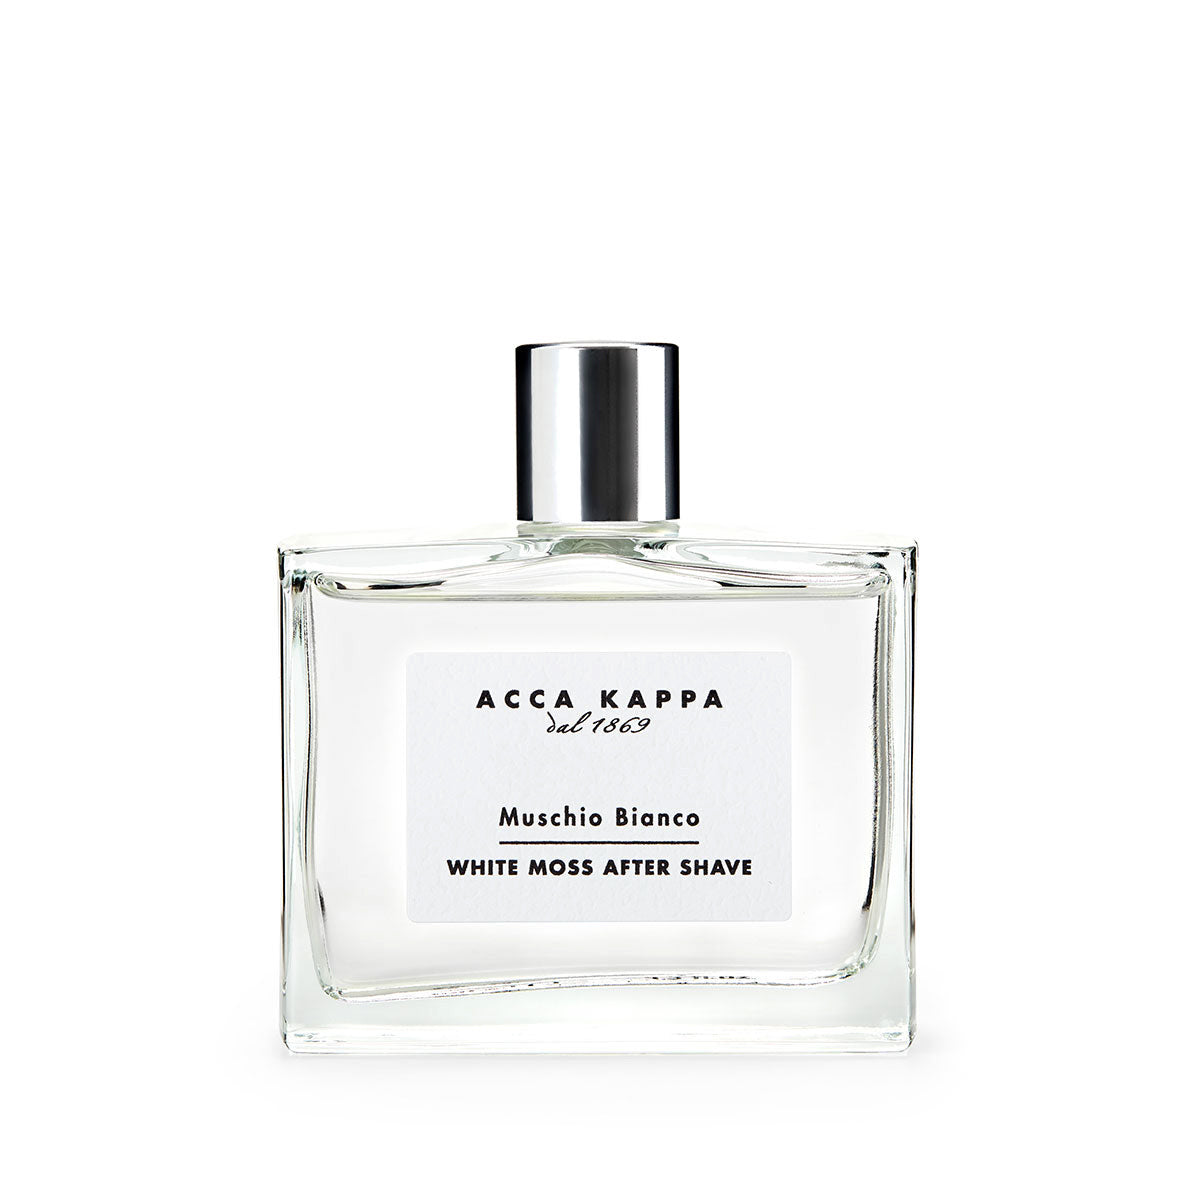 ACCA KAPPA White Moss After Shave